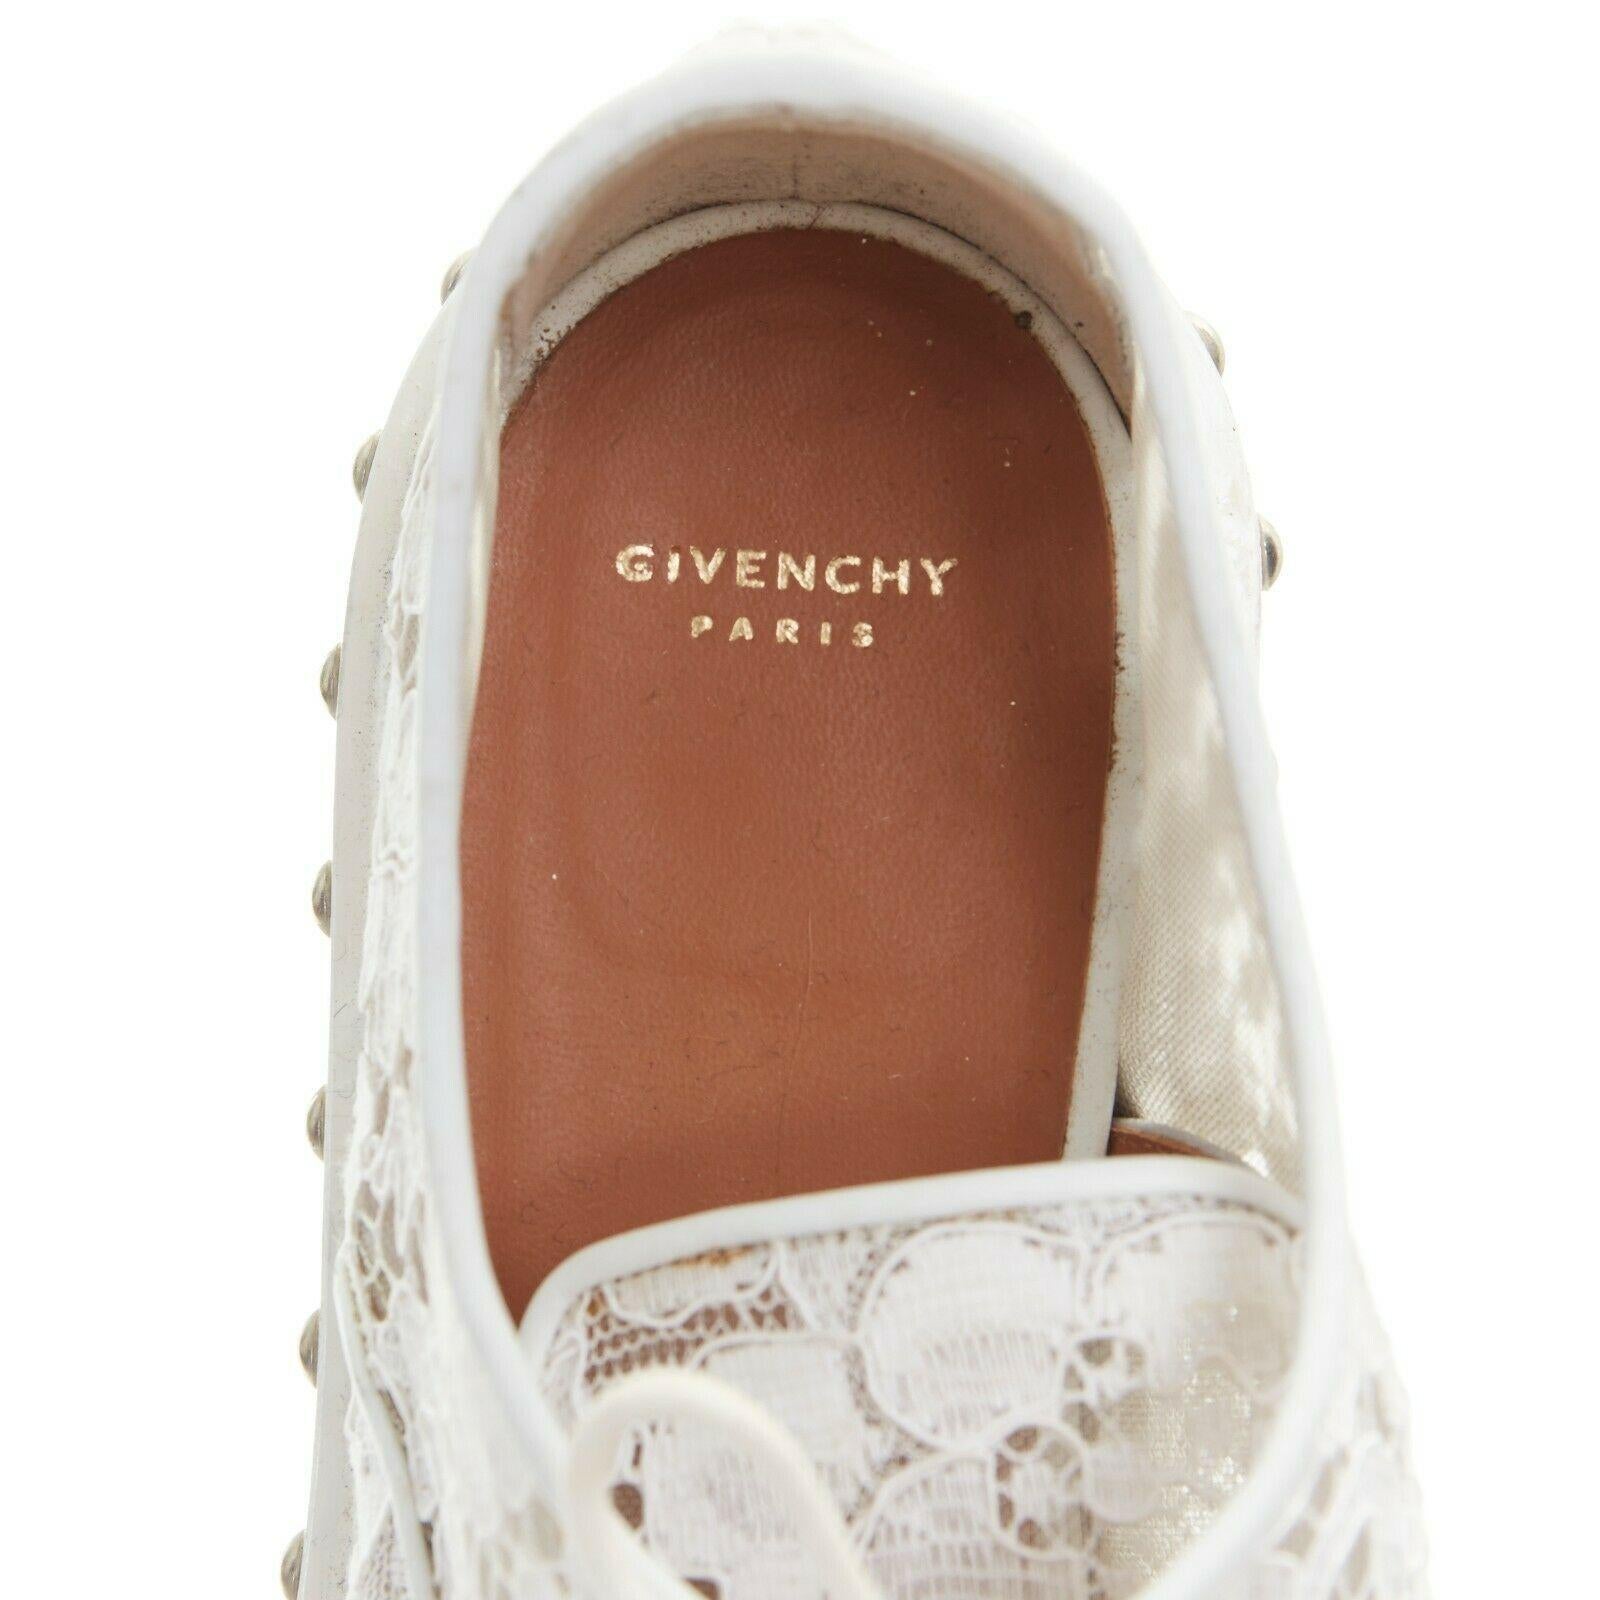 GIVENCHY TISCI white floral lace mesh silver stud outsole lace up brogue EU39 5